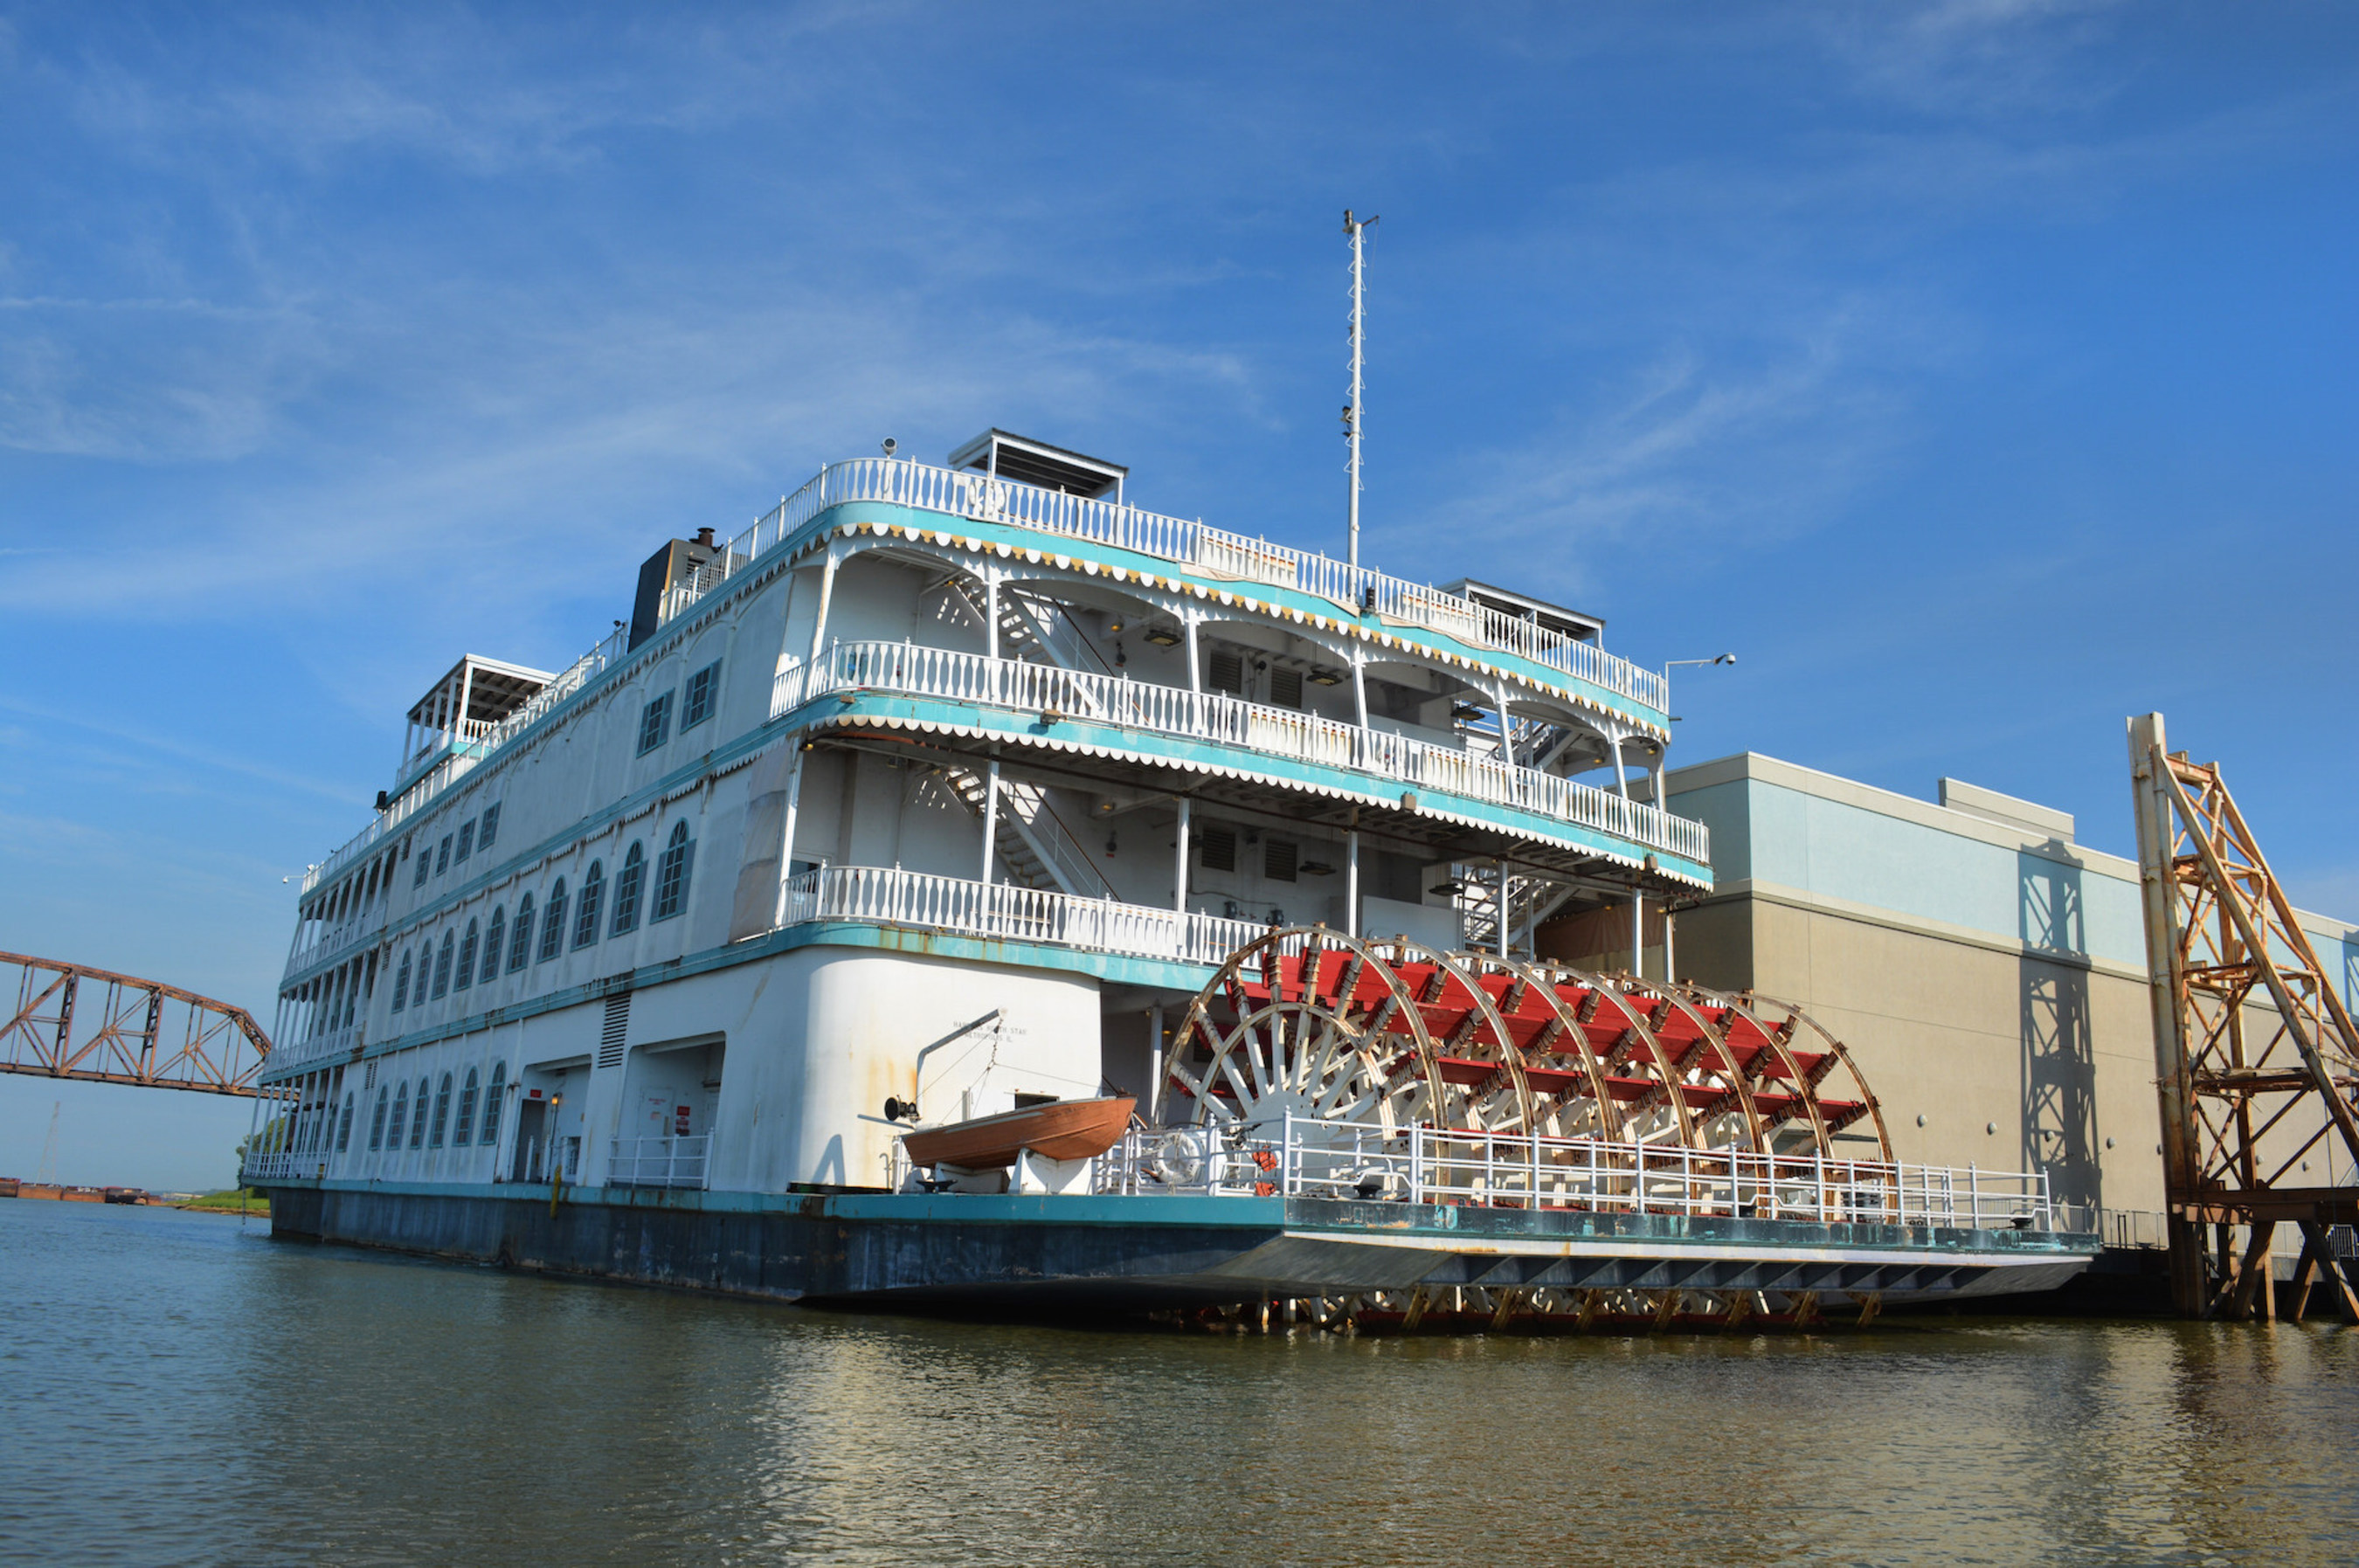 Accepting offers on riverboat before going to auction. Located on the Ohio River in Metropolis, IL.